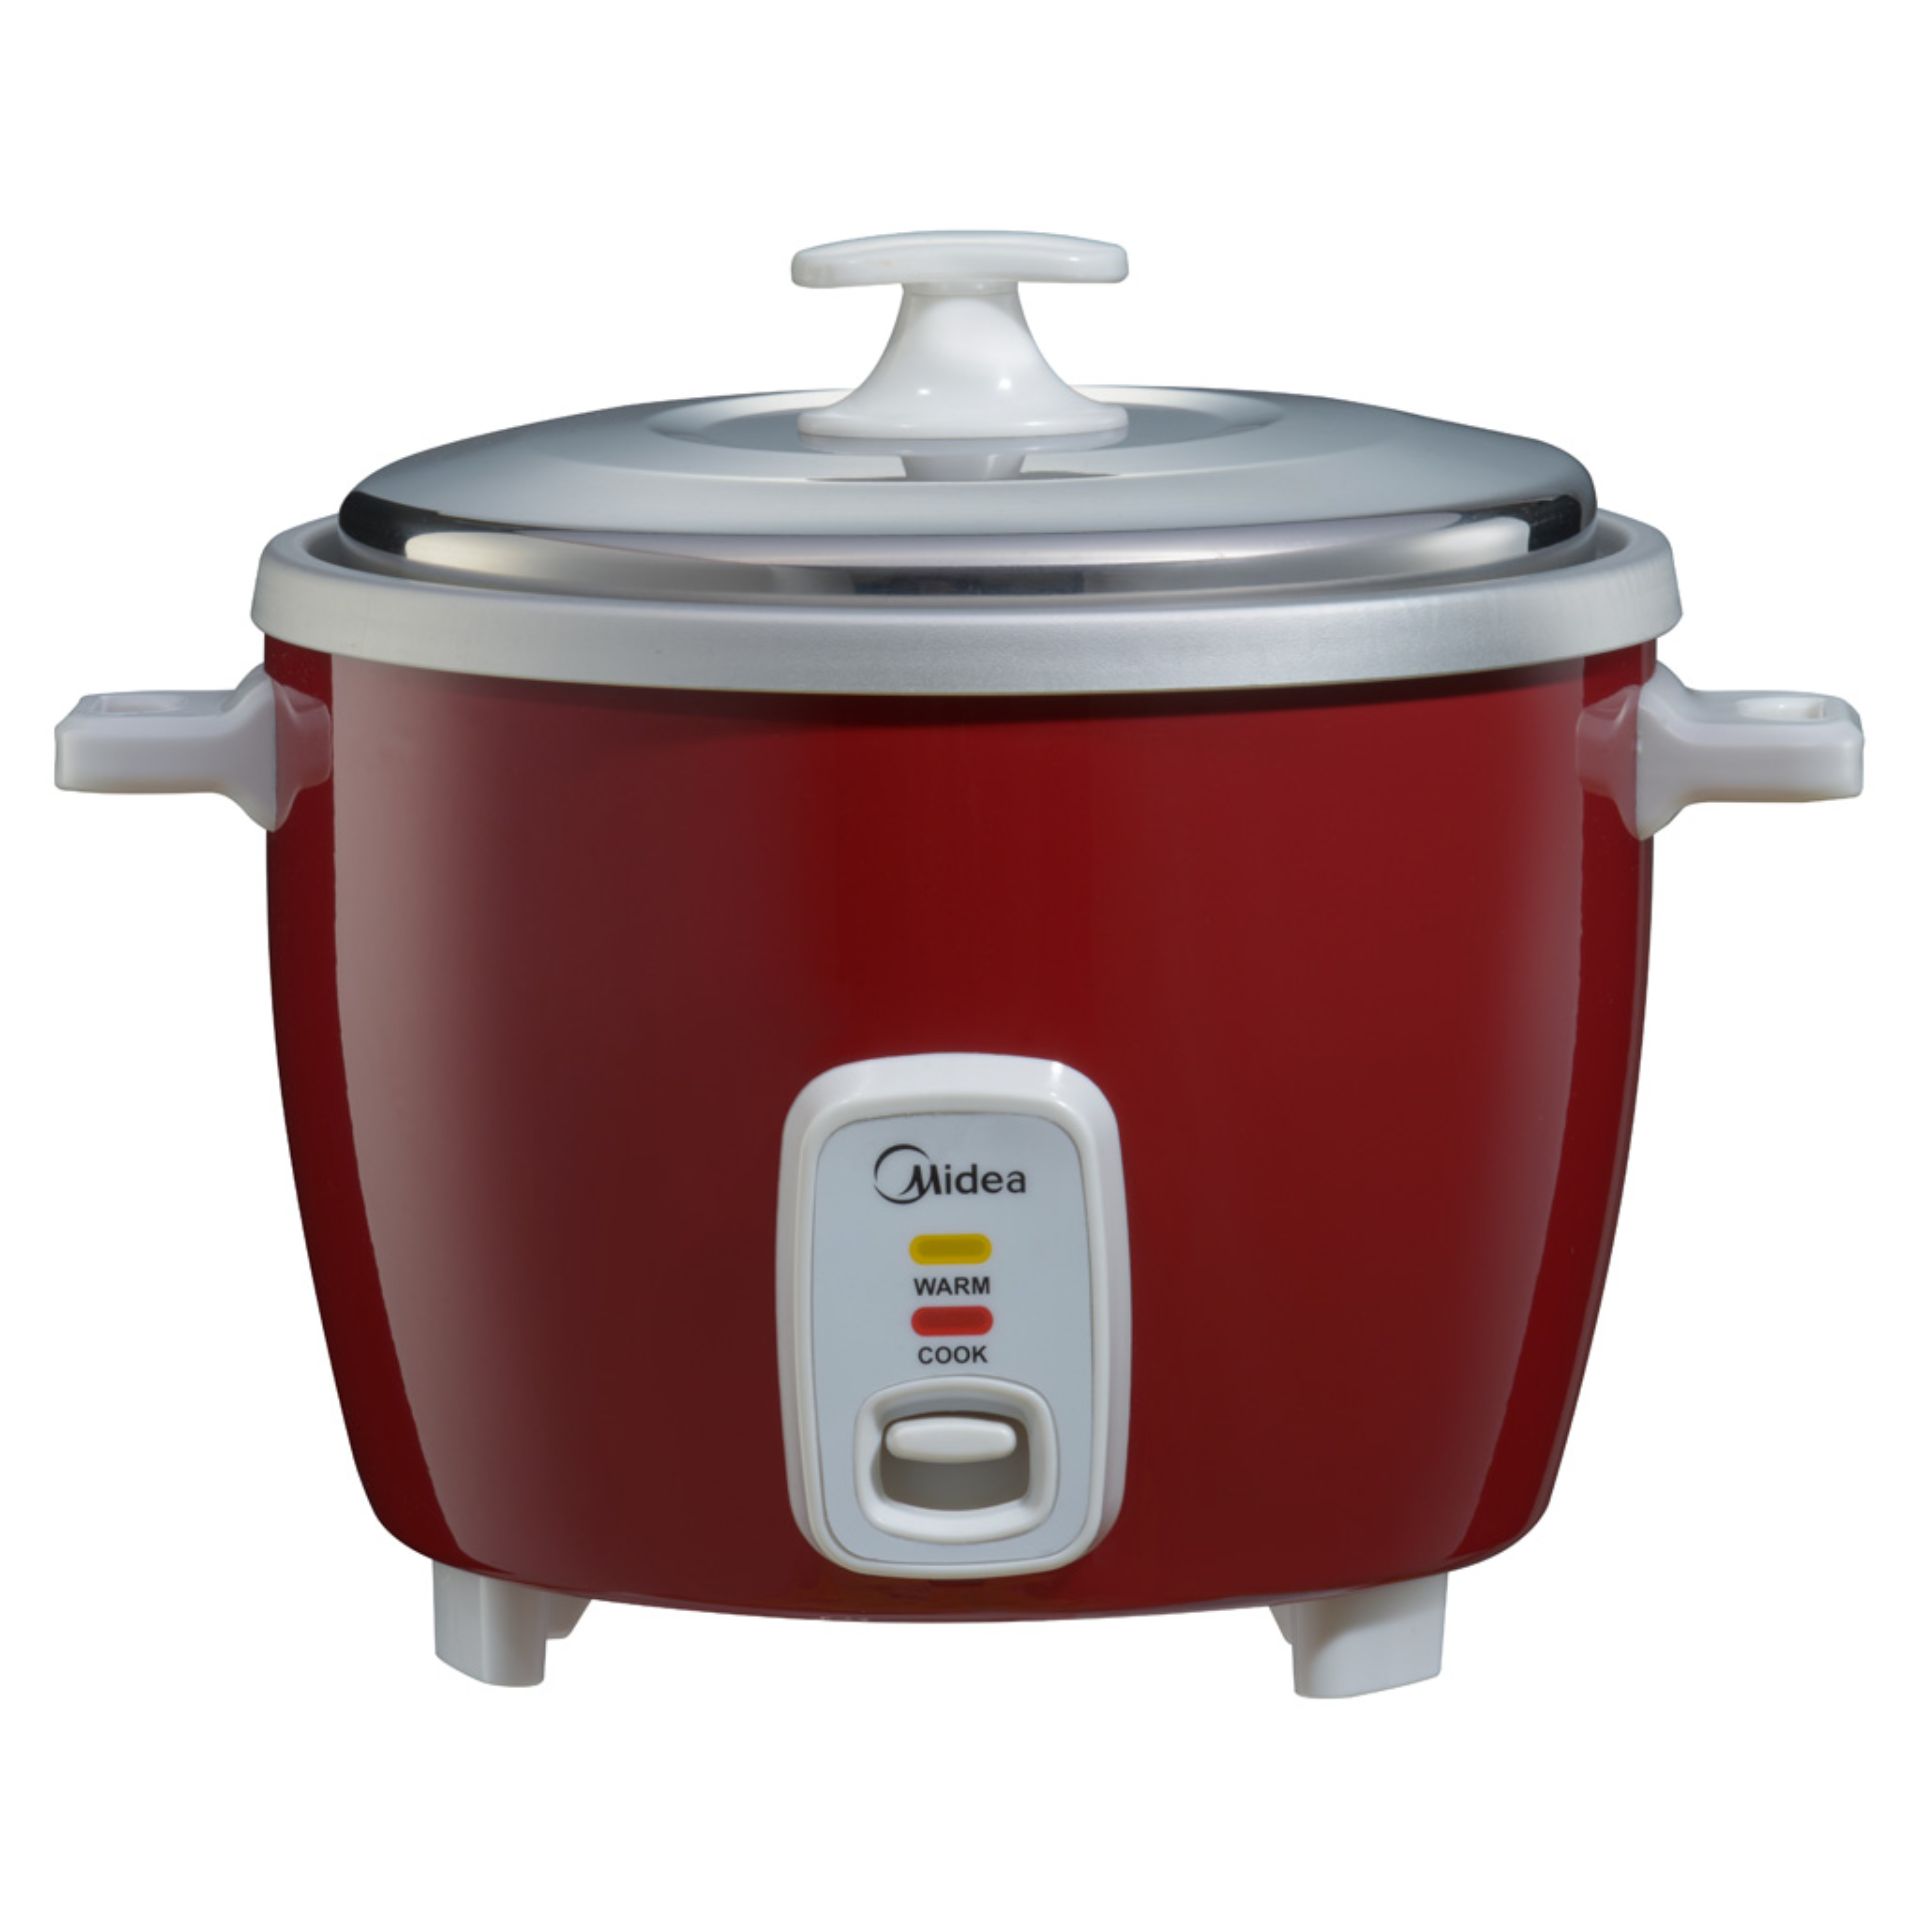 https://www.midea.com/content/dam/midea-aem/my/kitchen-appliances/cookers/rice-cookers/1-0l-conventional-rice-cooker-mr-gm10sda-r/gallery1.jpg